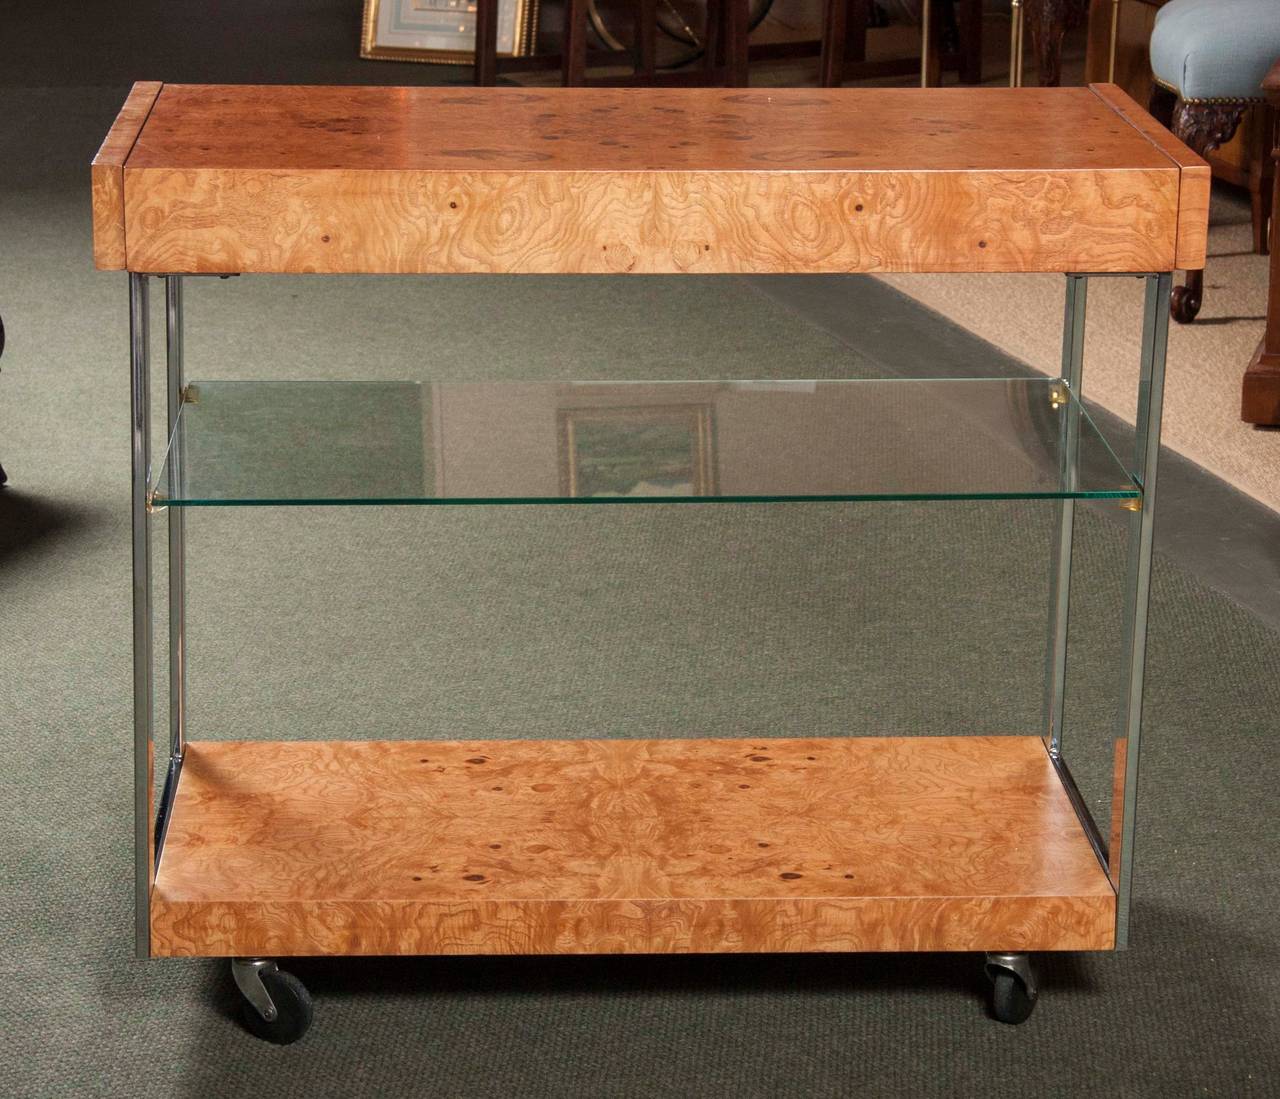 A Milo Baughman for Thayer Coggin three tier serving cart of burl olive wood with chrome plated metal on rubber casters.